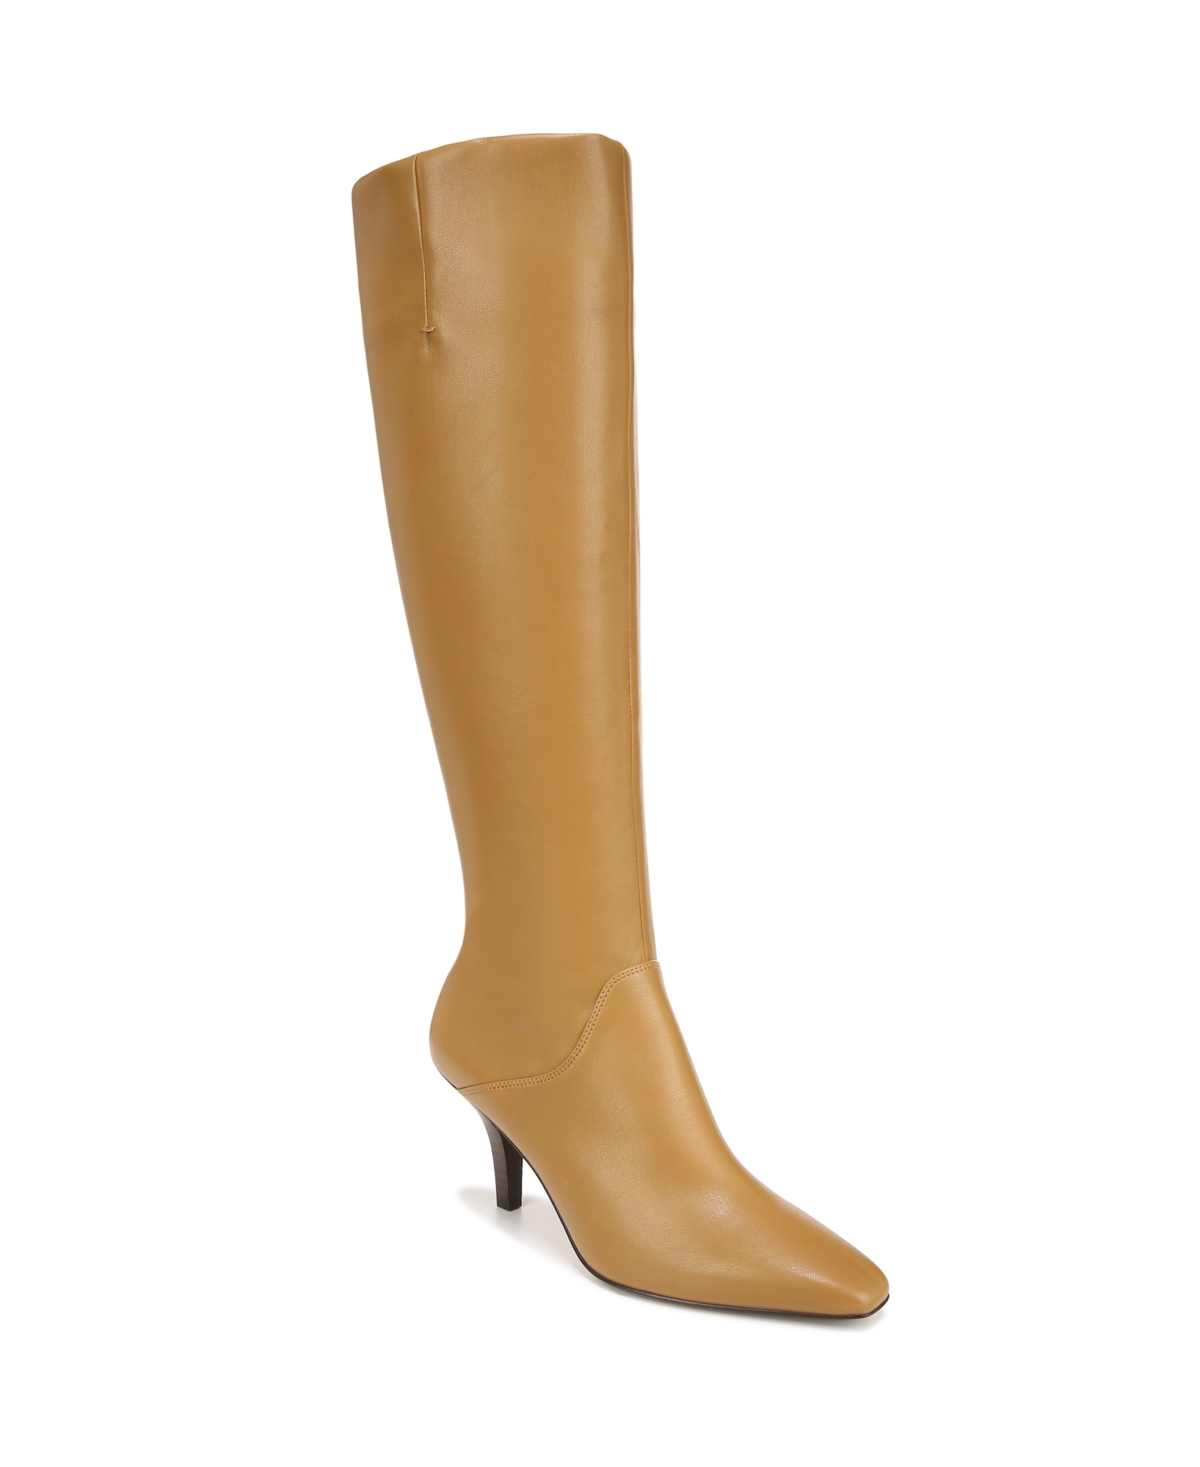 Lyla Knee High Boots - Camel Brown Faux Leather